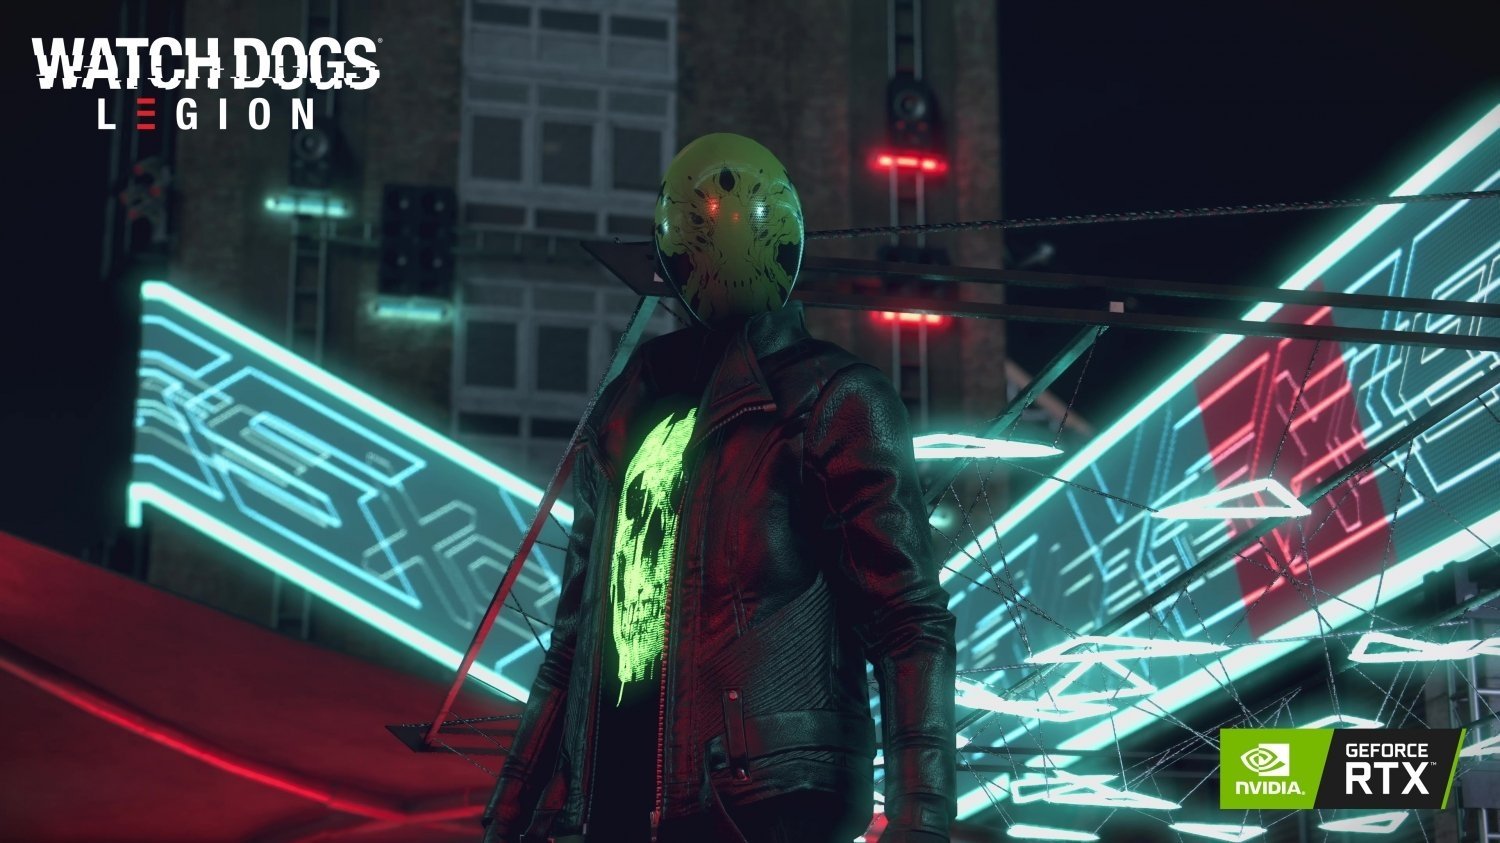 Watch Dogs Legion requires an RTX 3080 for ray tracing at 4K Ultra